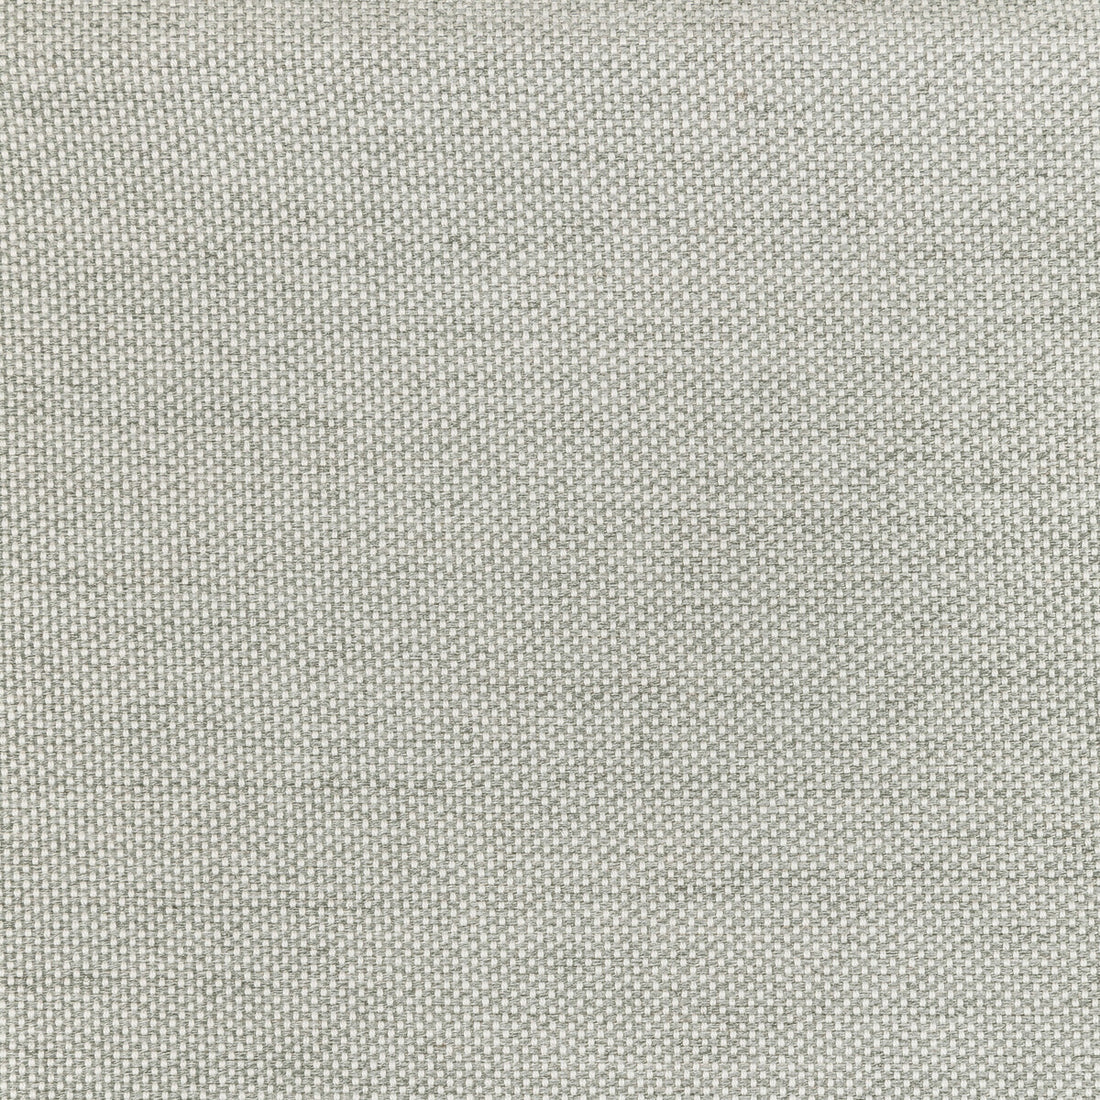 Kravet Basics fabric in 36826-11 color - pattern 36826.11.0 - by Kravet Basics in the Indoor / Outdoor collection